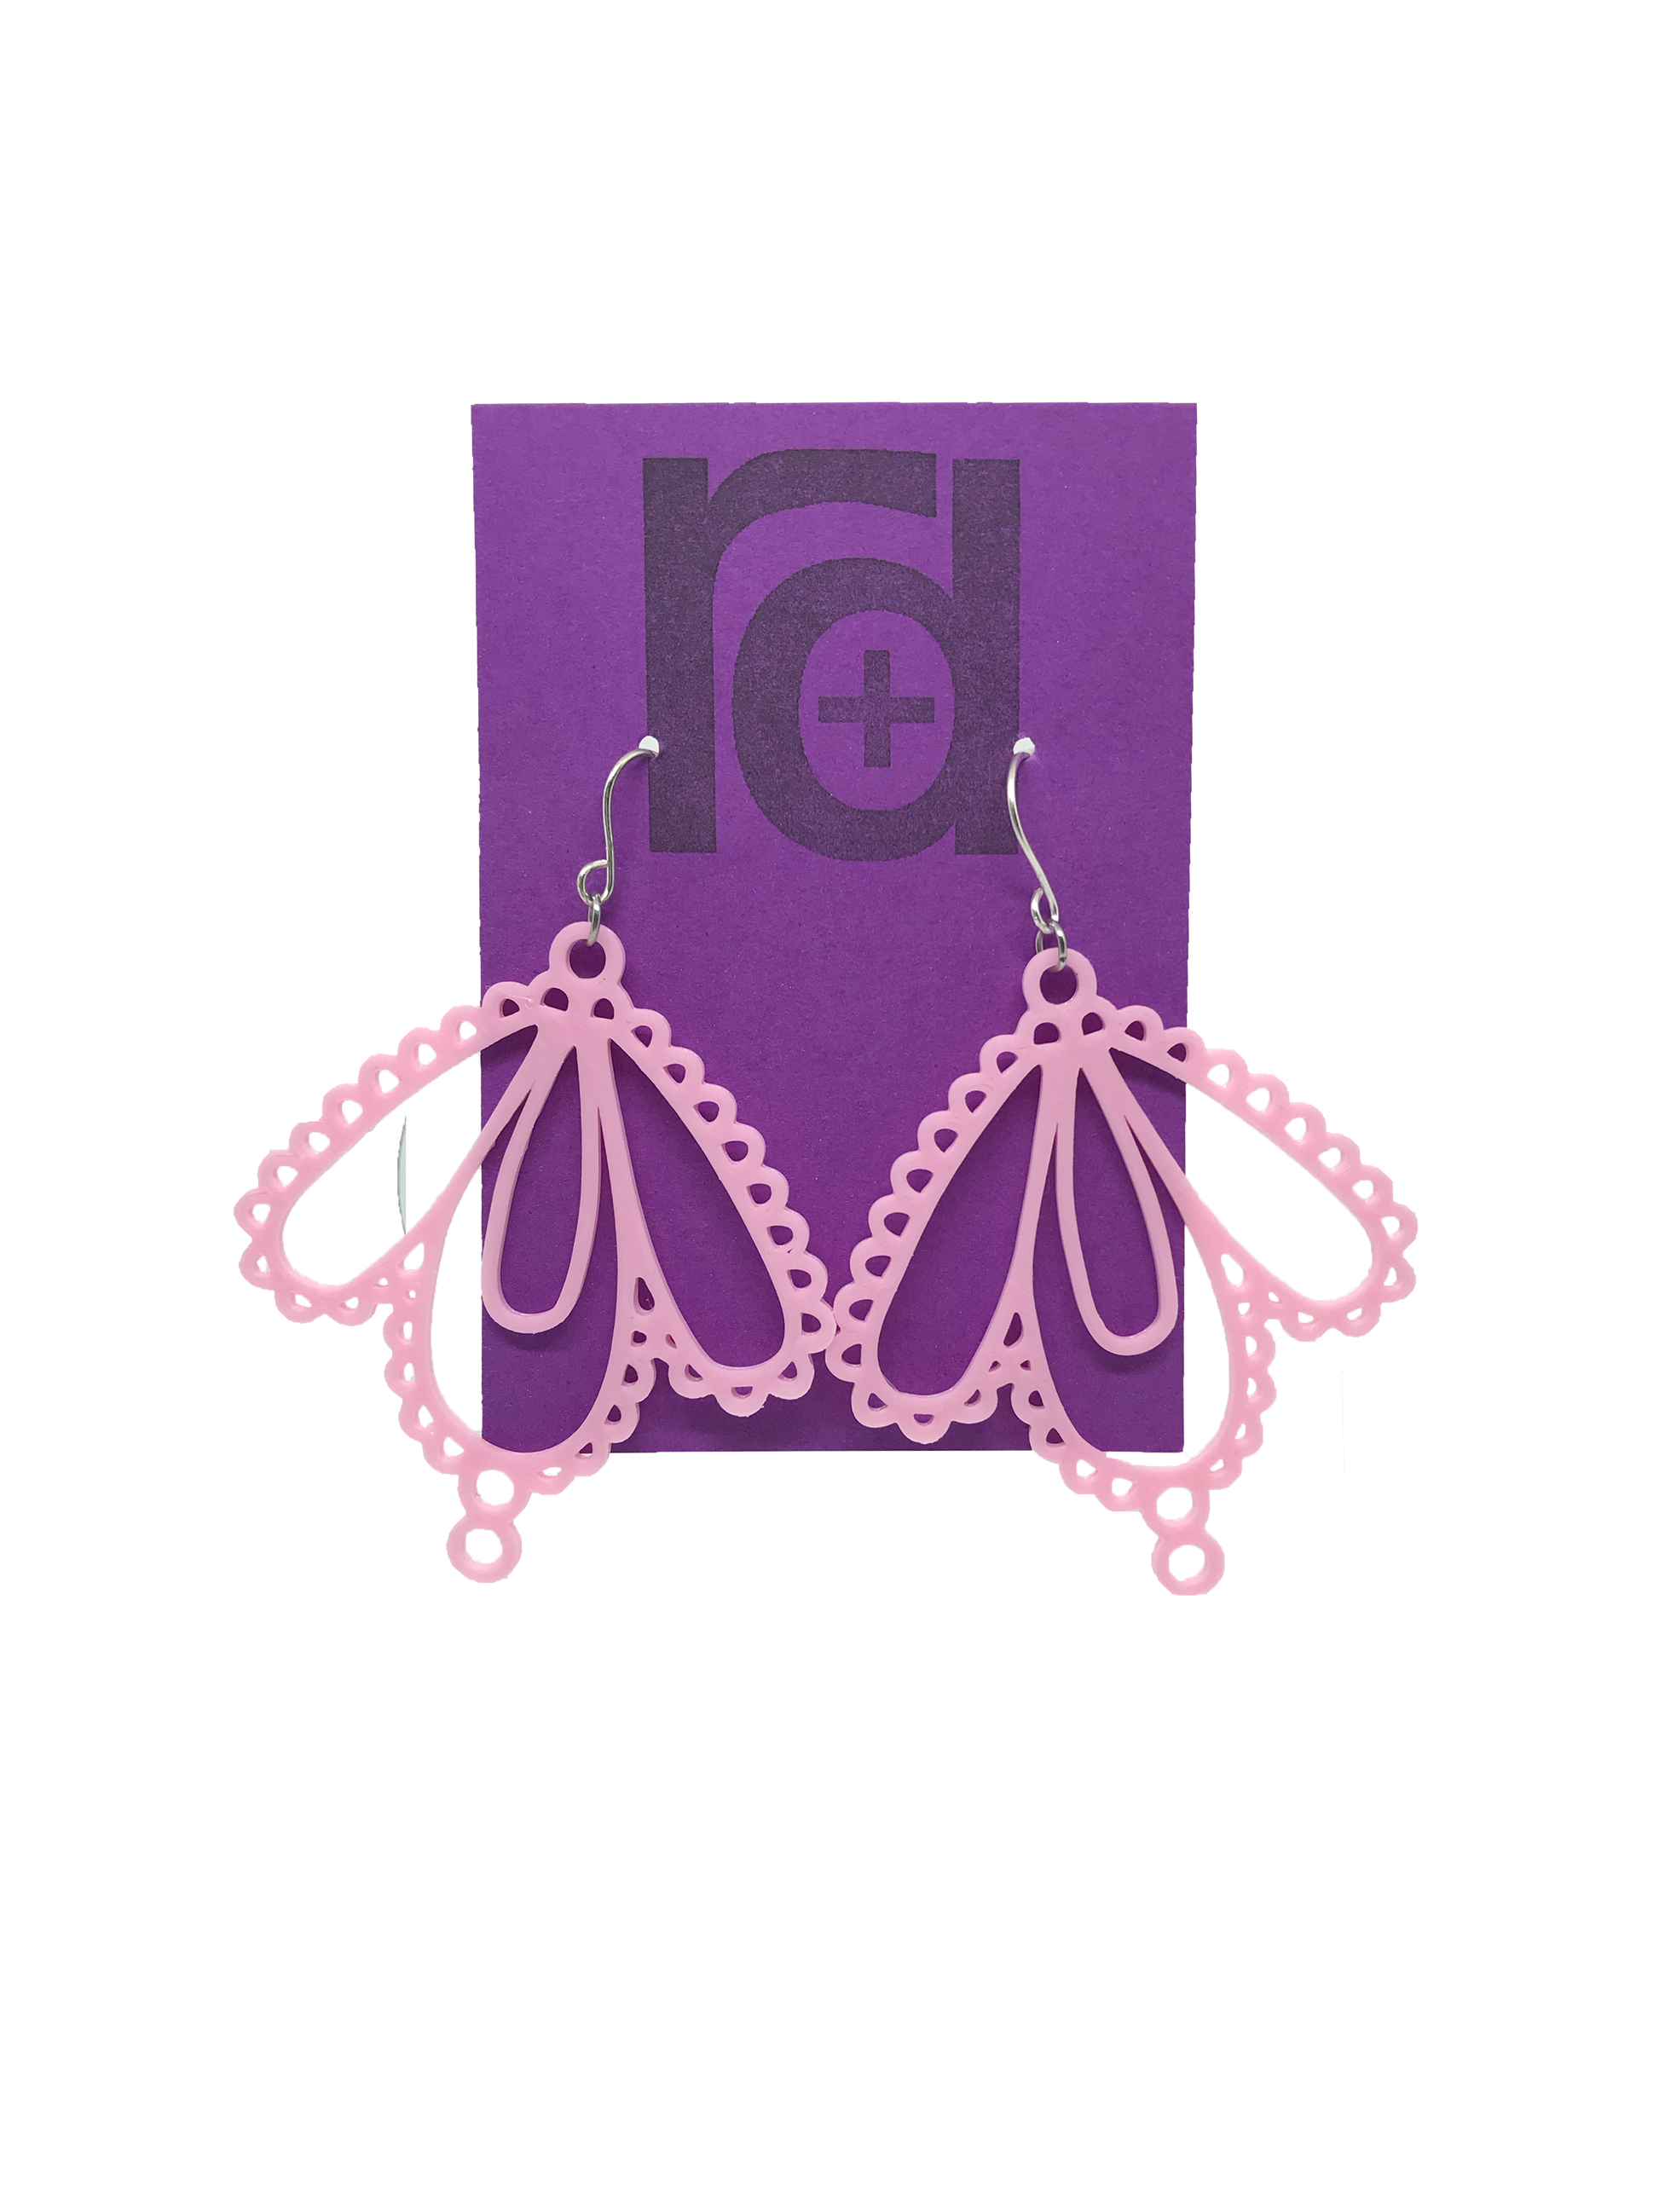 Two earrings on a purple earring card: they have three teardrop shapes and are reminiscent to lace. These 3D printed earrings are made with a light pink sustainable filament.